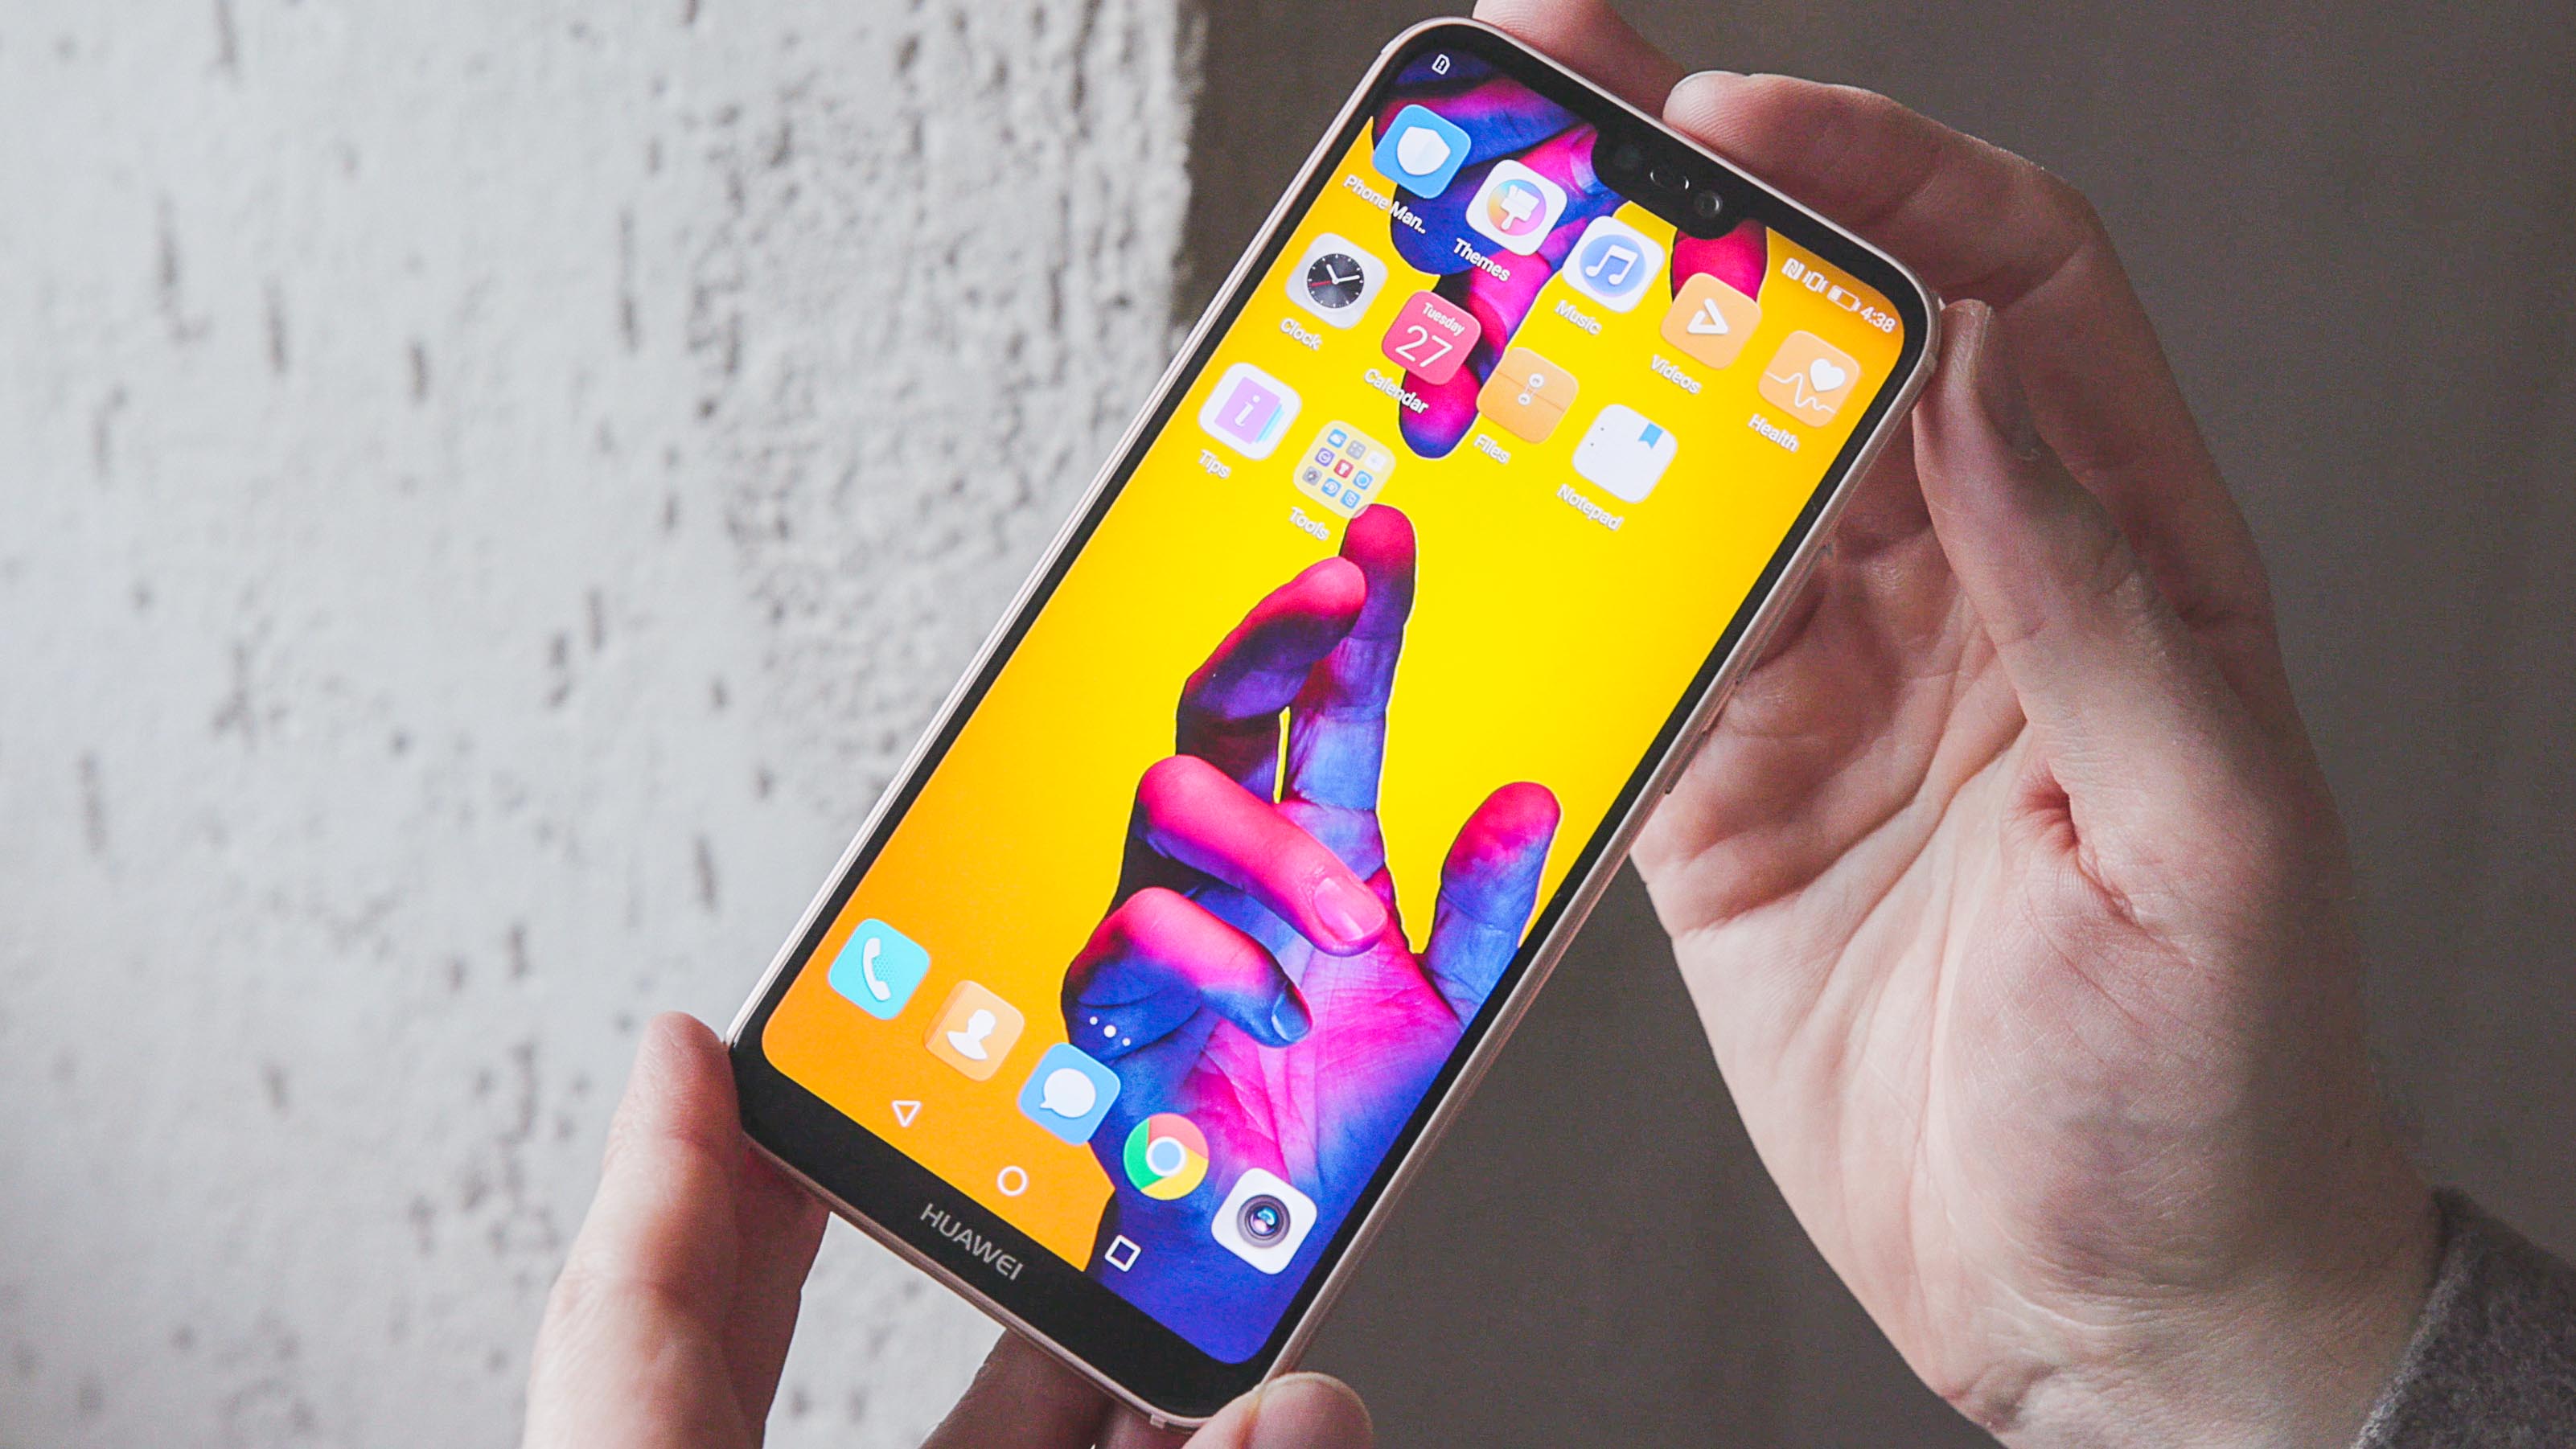 Huawei P20 Lite Review: Premium Looks for Half the Price - Tech